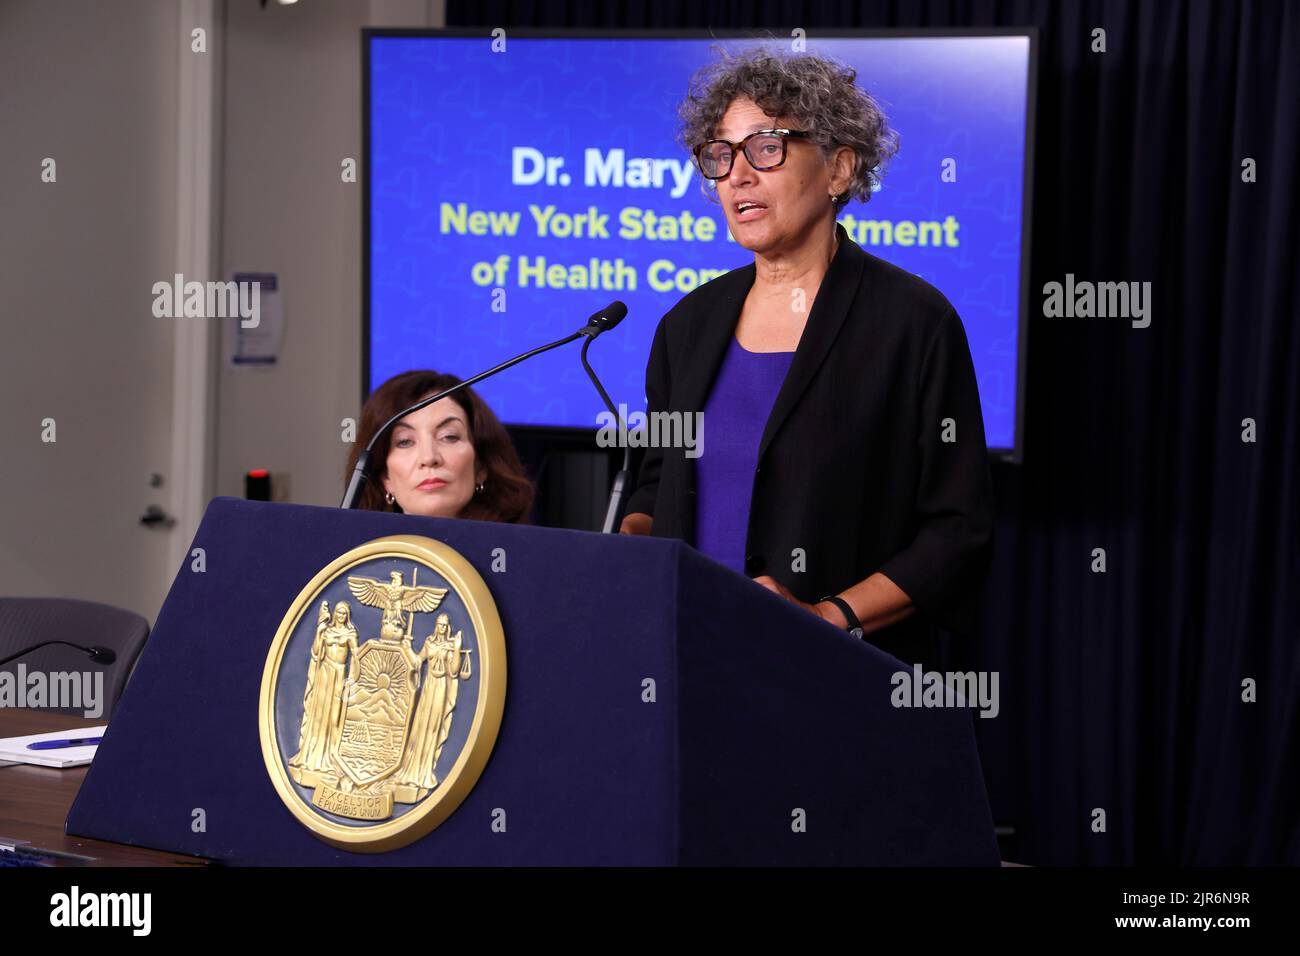 New York City, USA. 22nd Aug, 2022. Mary Bassett, commissioner of the New York State Department of Health, speaks during a health department press briefing in Midtown on August 22, 2022 in New York City, USA. Governor Hochul reiterated COVID-19 Federal CDC guidelines for schools while the NYS Health commissioner outlined necessary steps to combatting Monkeypox and the resurgence of Polio. ( Photo by John Lamparski/Sipa USA) Credit: Sipa USA/Alamy Live News Stock Photo